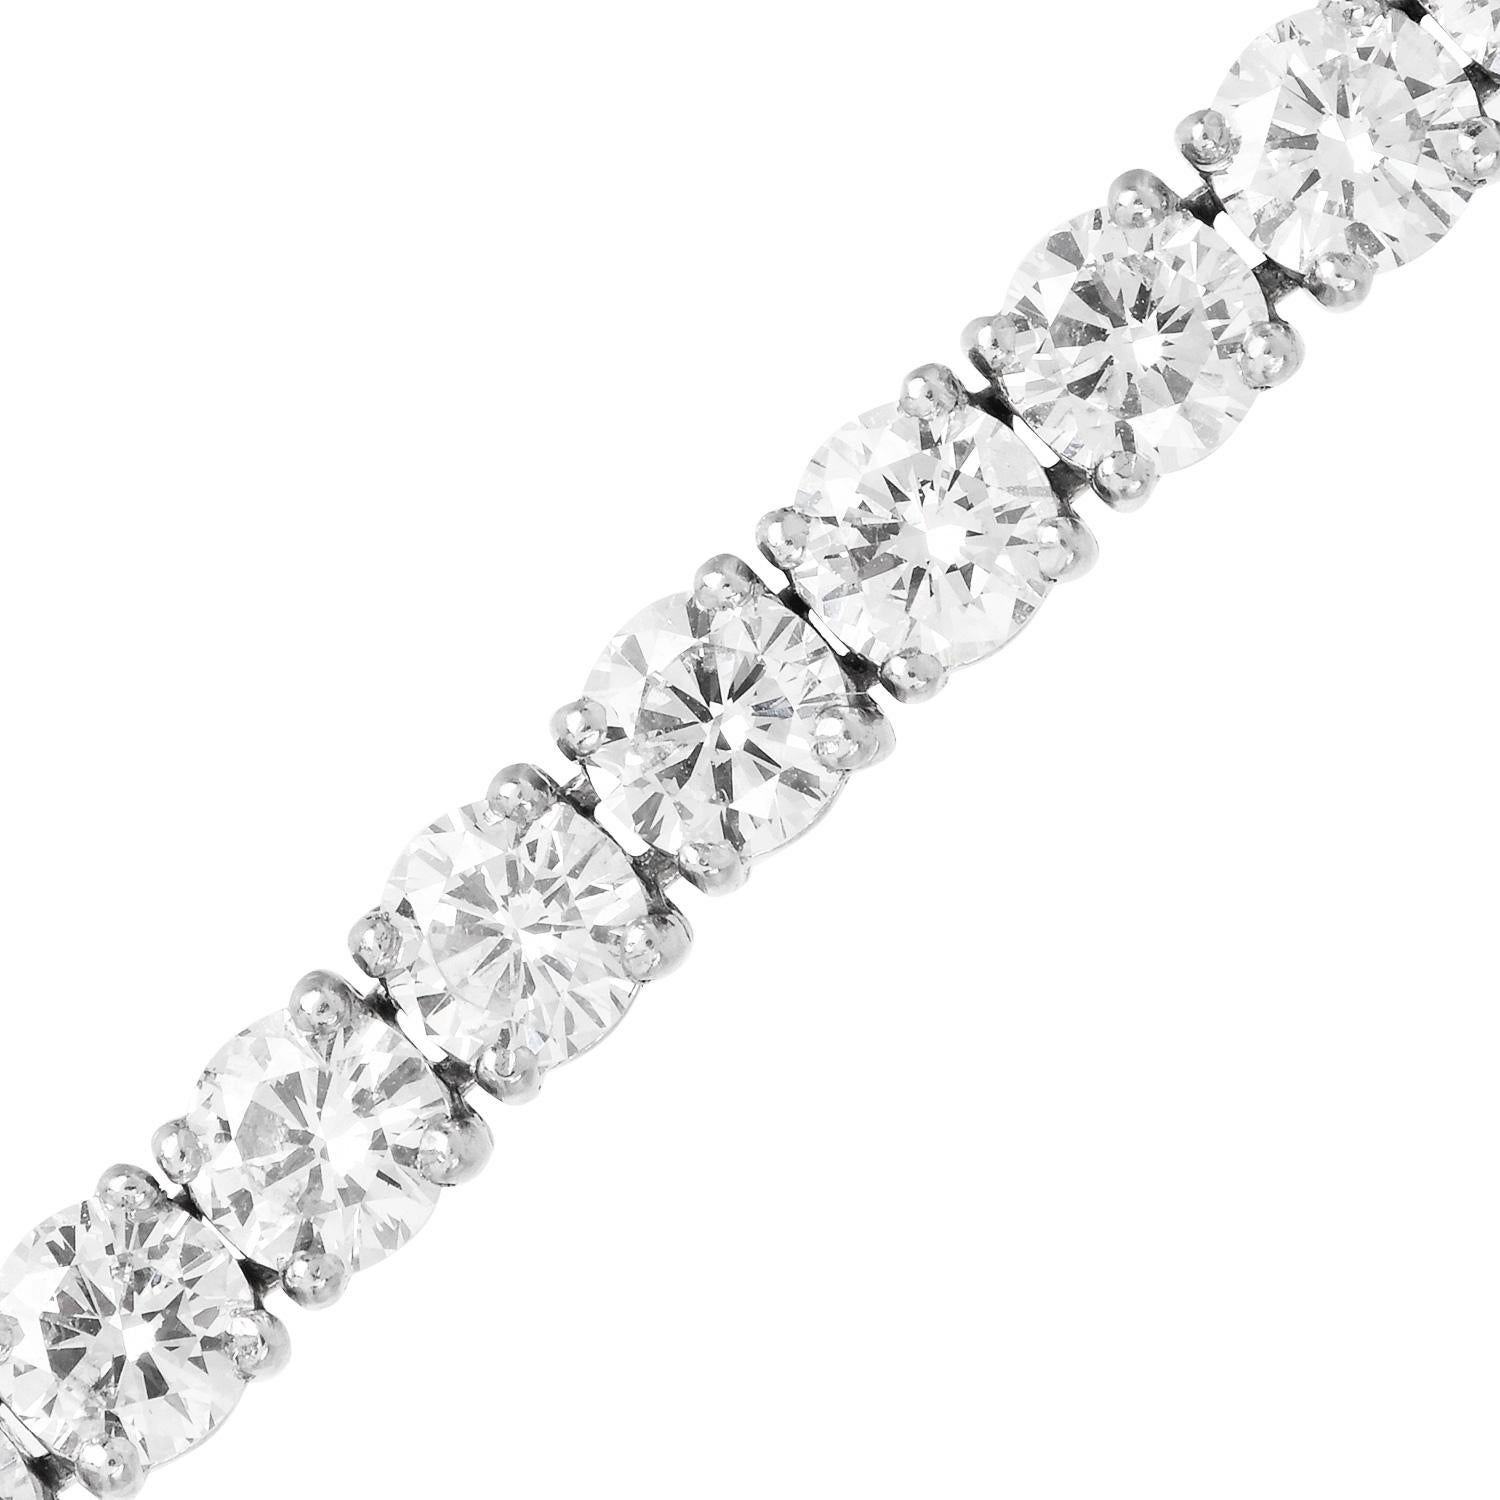 A perfect gift For a special Woman in your life!
A classic look for everyday use, this vintage 1960s tennis link  Line bracelet is crafted in platinum.
Sparkly 0.20 carats Round Cut Diamonds cover the piece, totalling 8.75 carats graded G-H color